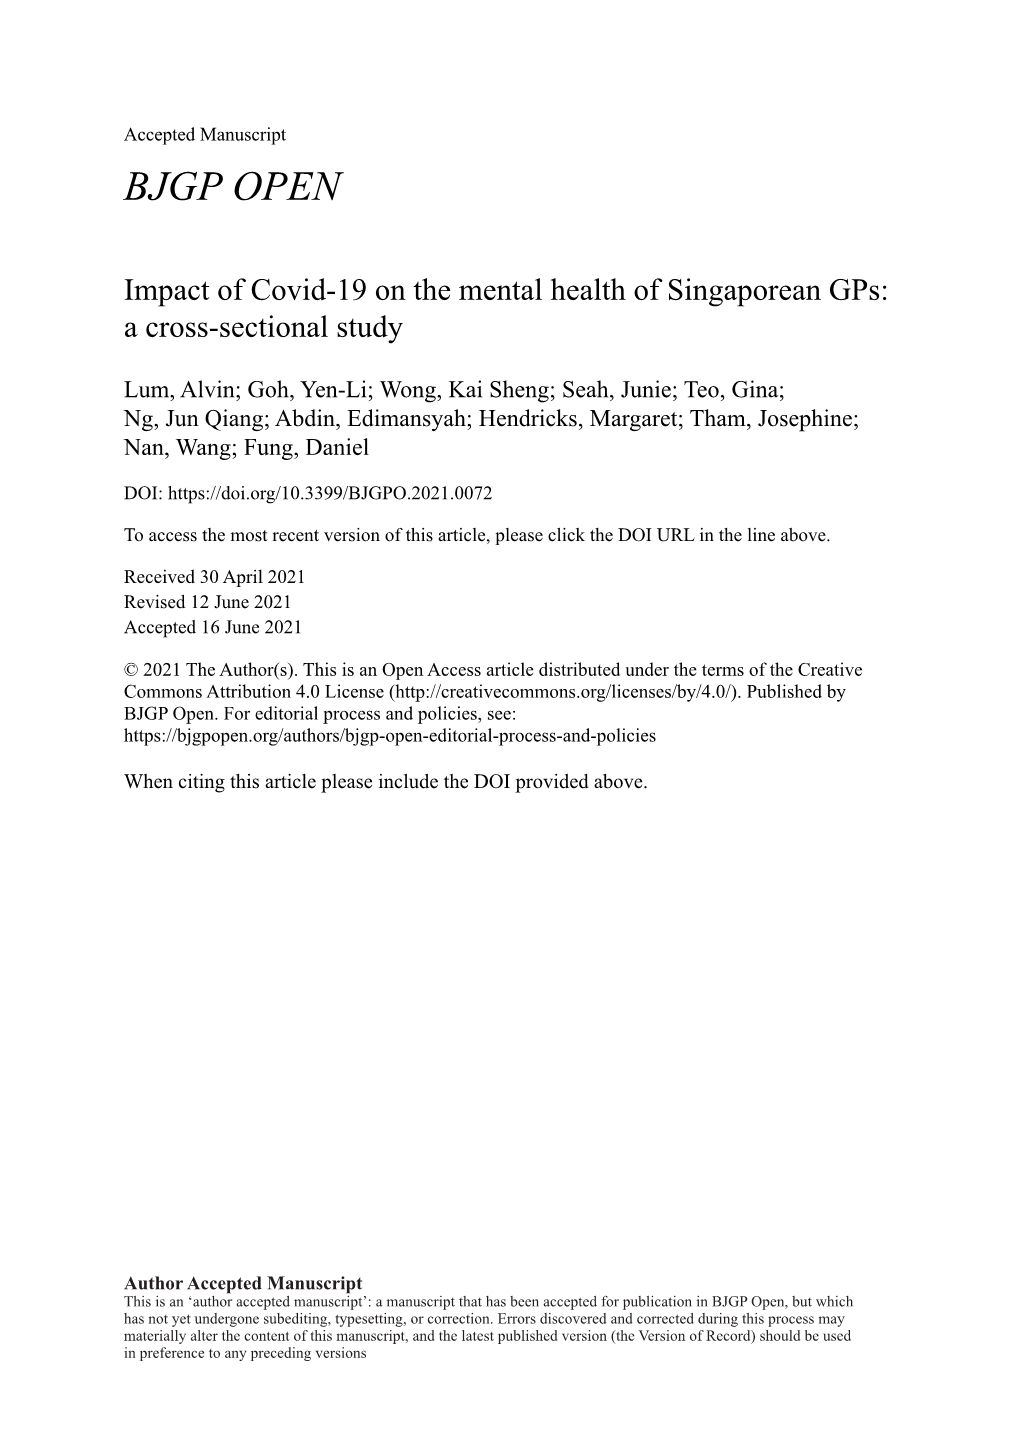 Impact of Covid-19 on the Mental Health of Singaporean Gps: a Cross-Sectional Study